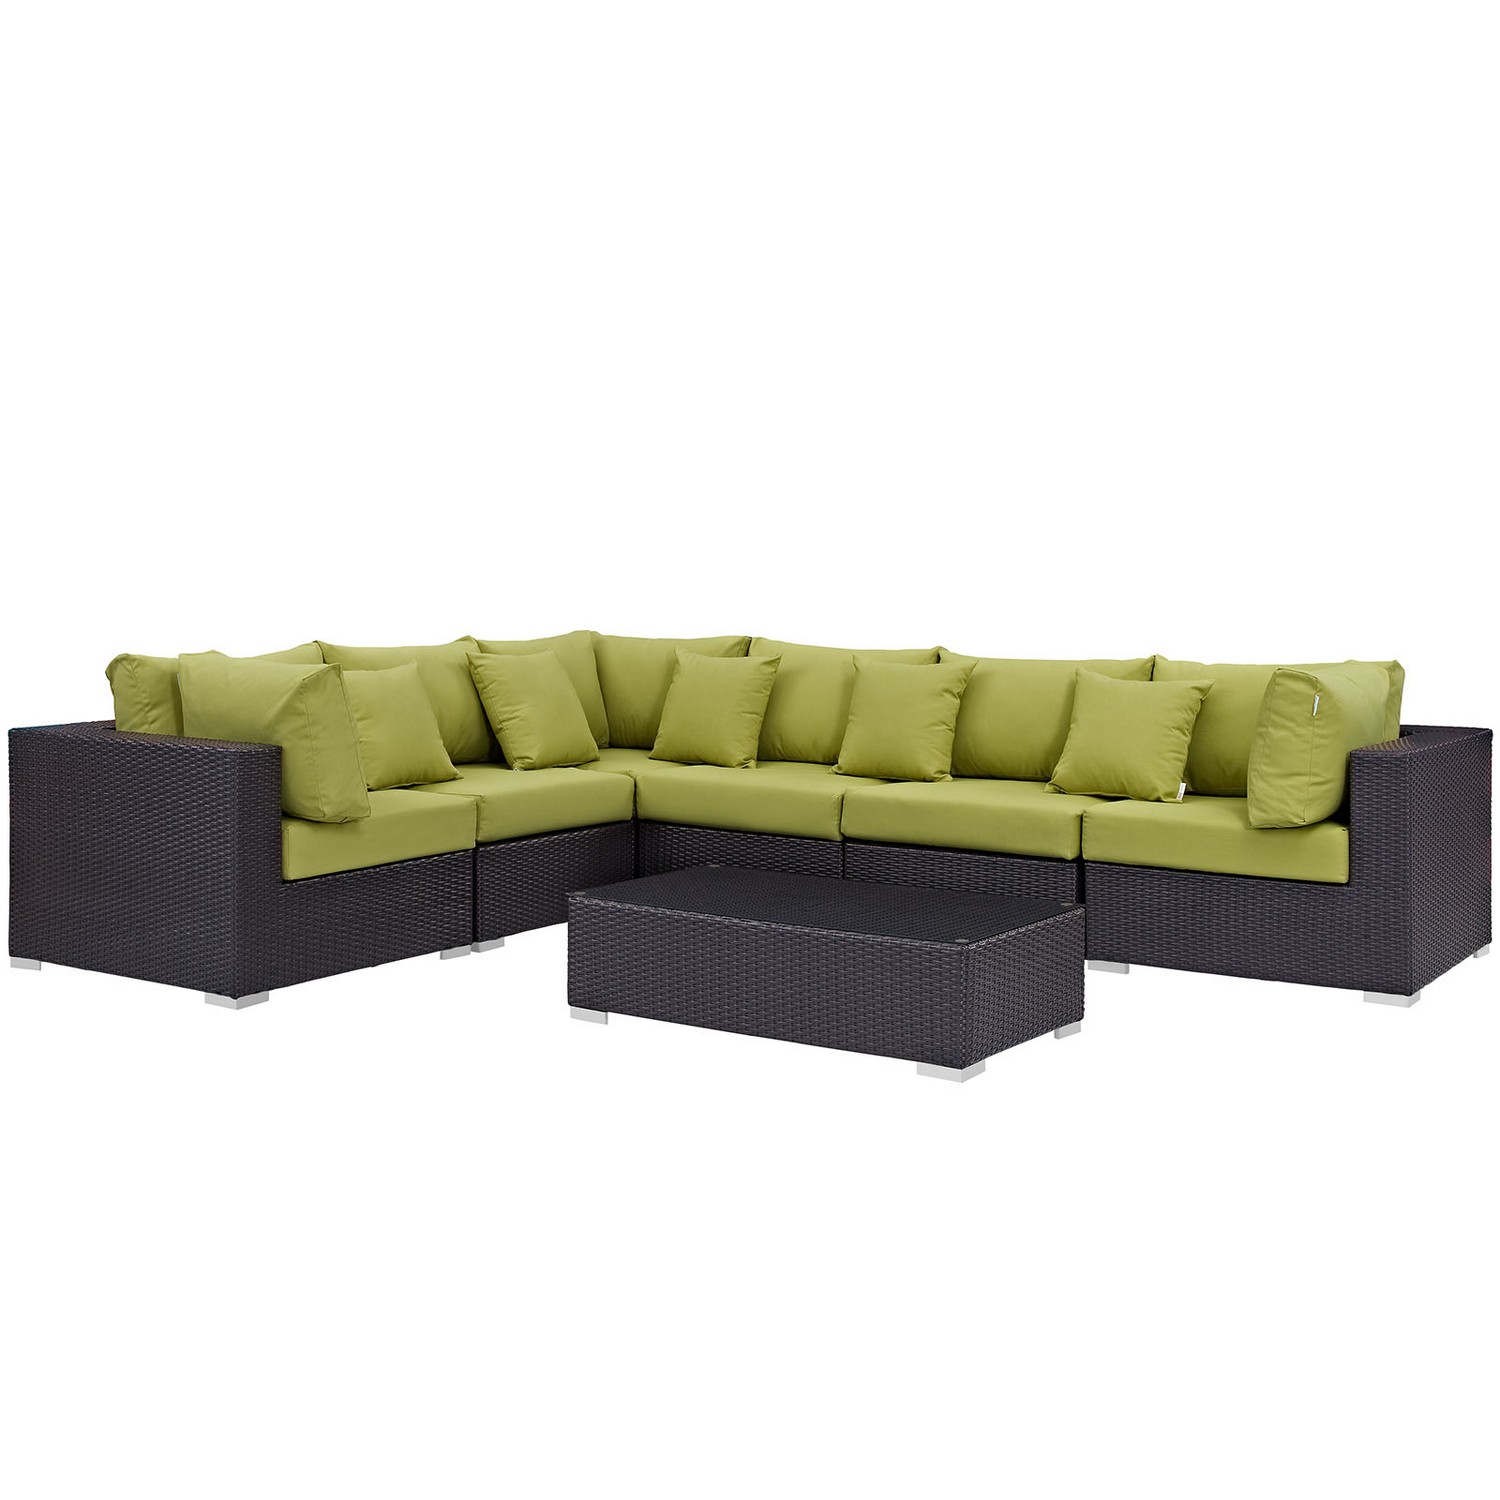 Modway Convene 7 Piece Outdoor Patio Sectional Set - Expresso Peridot